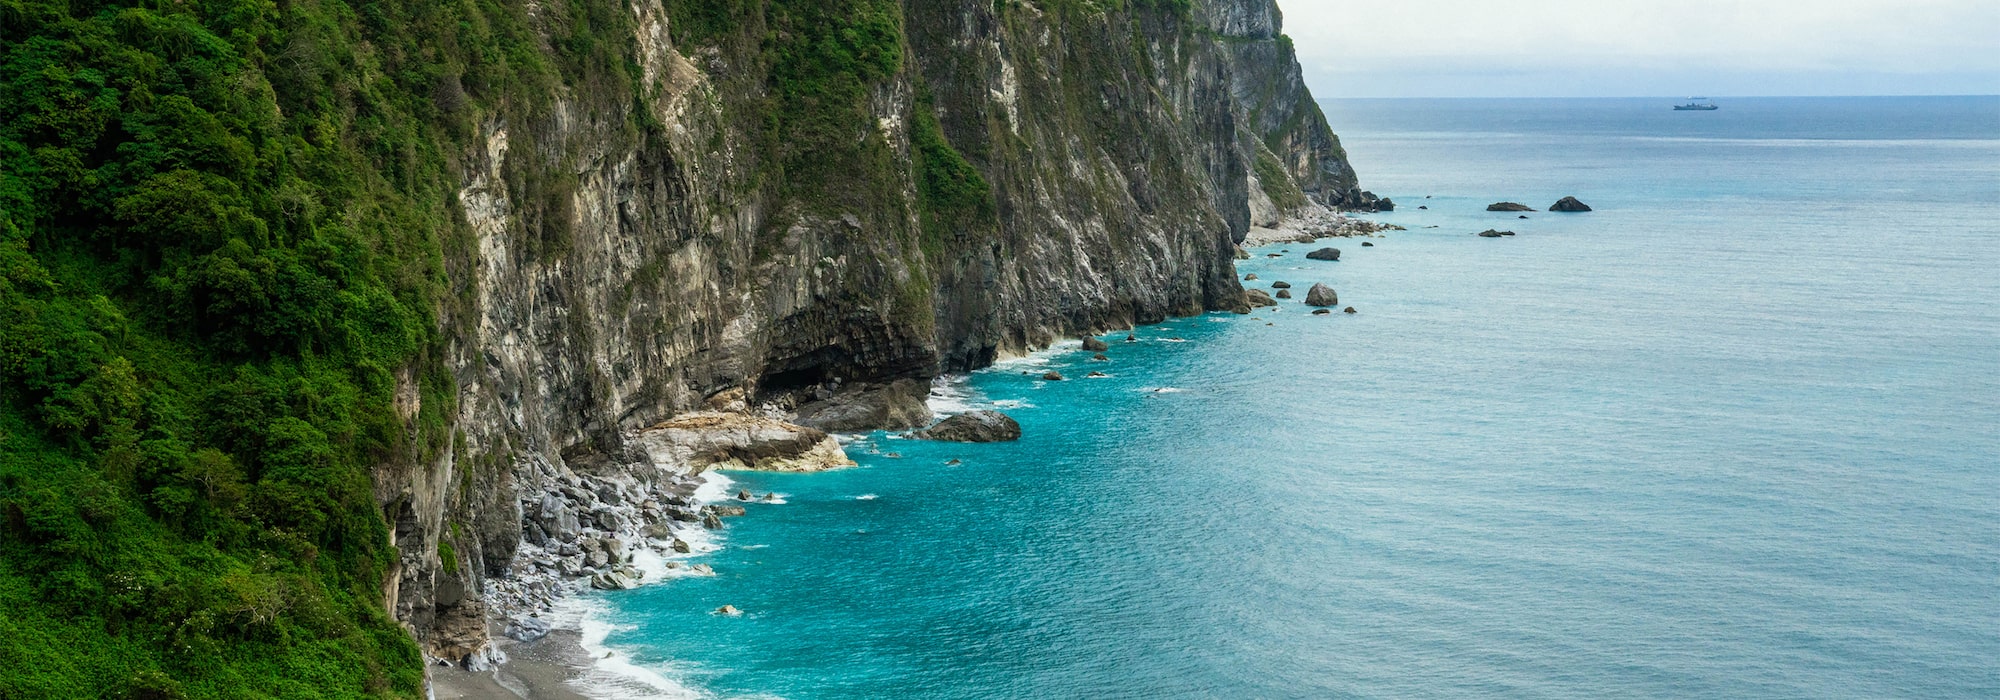 Qingshui Cliff, Taiwan  Taiwan offers both dramatic scenery and dynamic city life all around the country. The amiable locals have a ‘c’est la vie’ attitude that makes it a joy to visit.